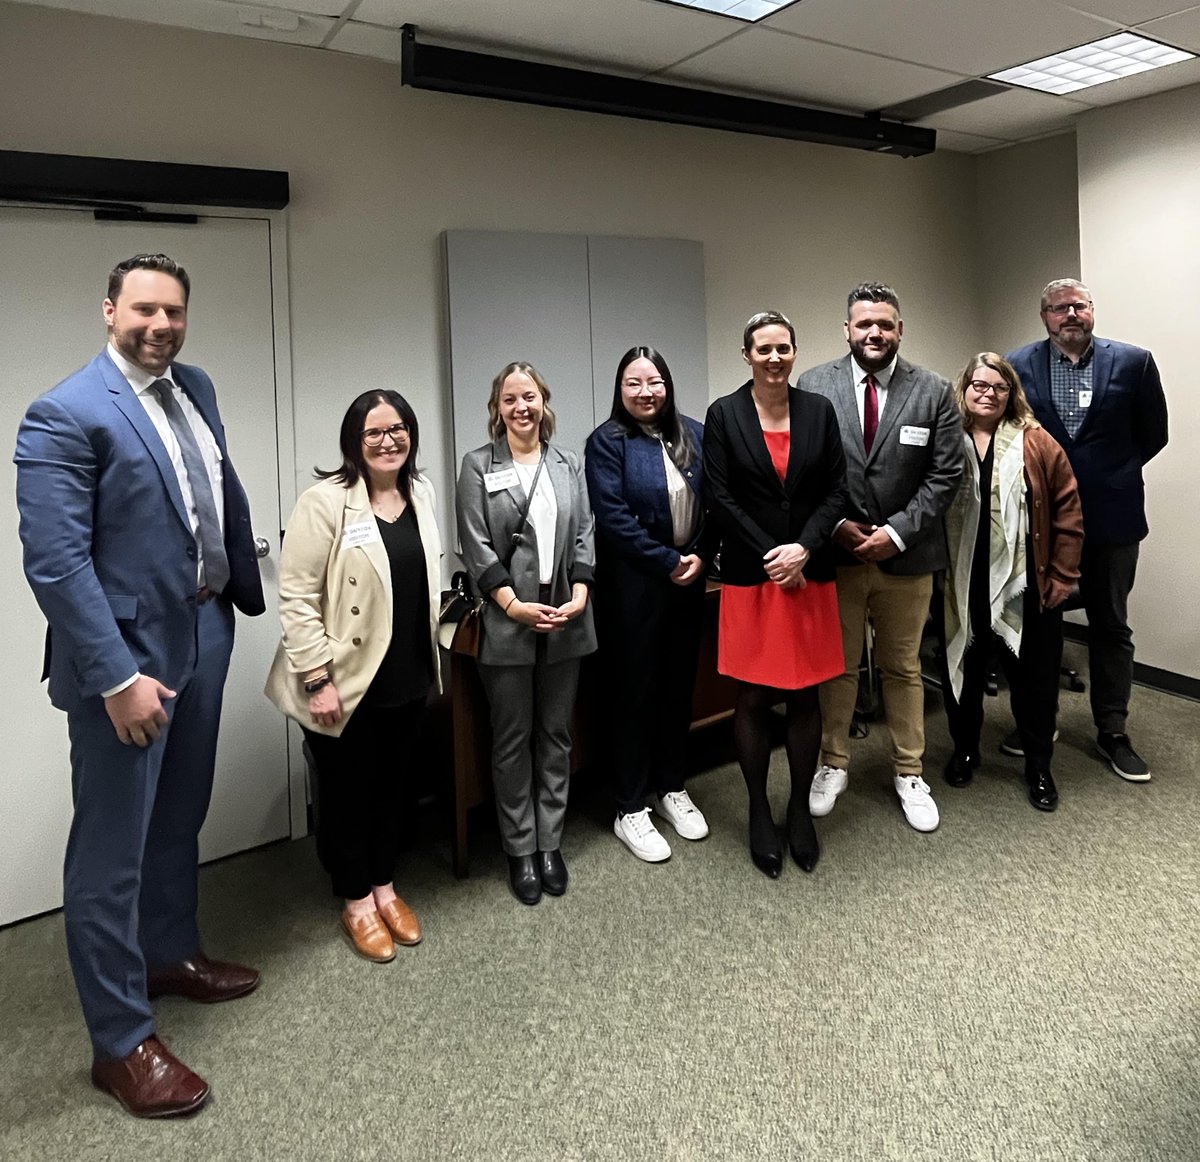 Thank you to the representatives from First Work who came to Queens Park yesterday to discuss the future of employment supports for folks across Ontario. These supports provide so much to so many, they deserve meaningful investments from the gov to continue their good work.